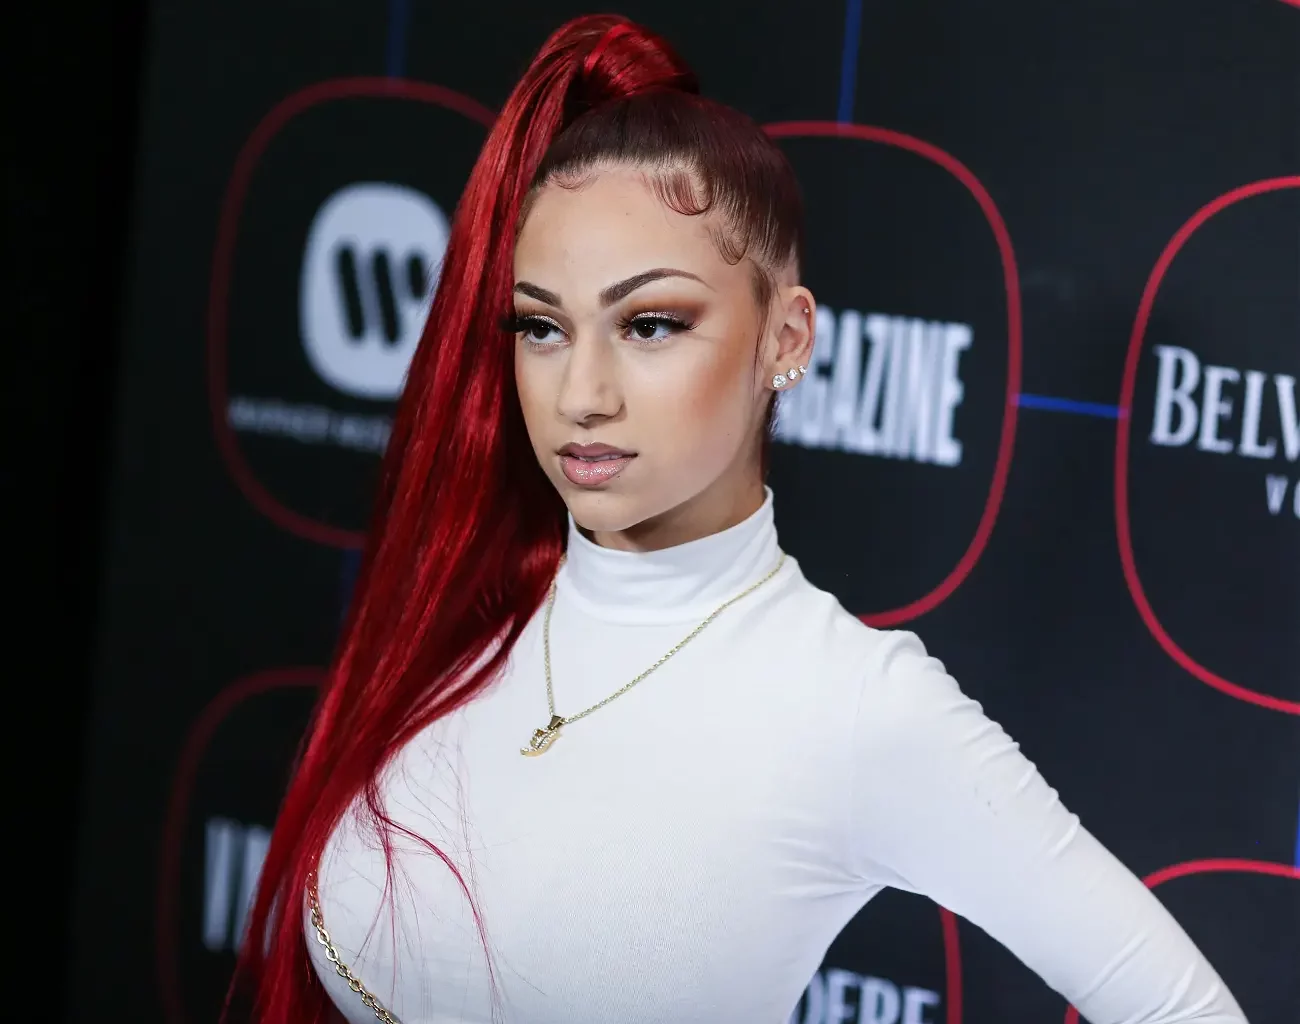 Bhad Bhabie: Controversies, Challenges, and Triumphs